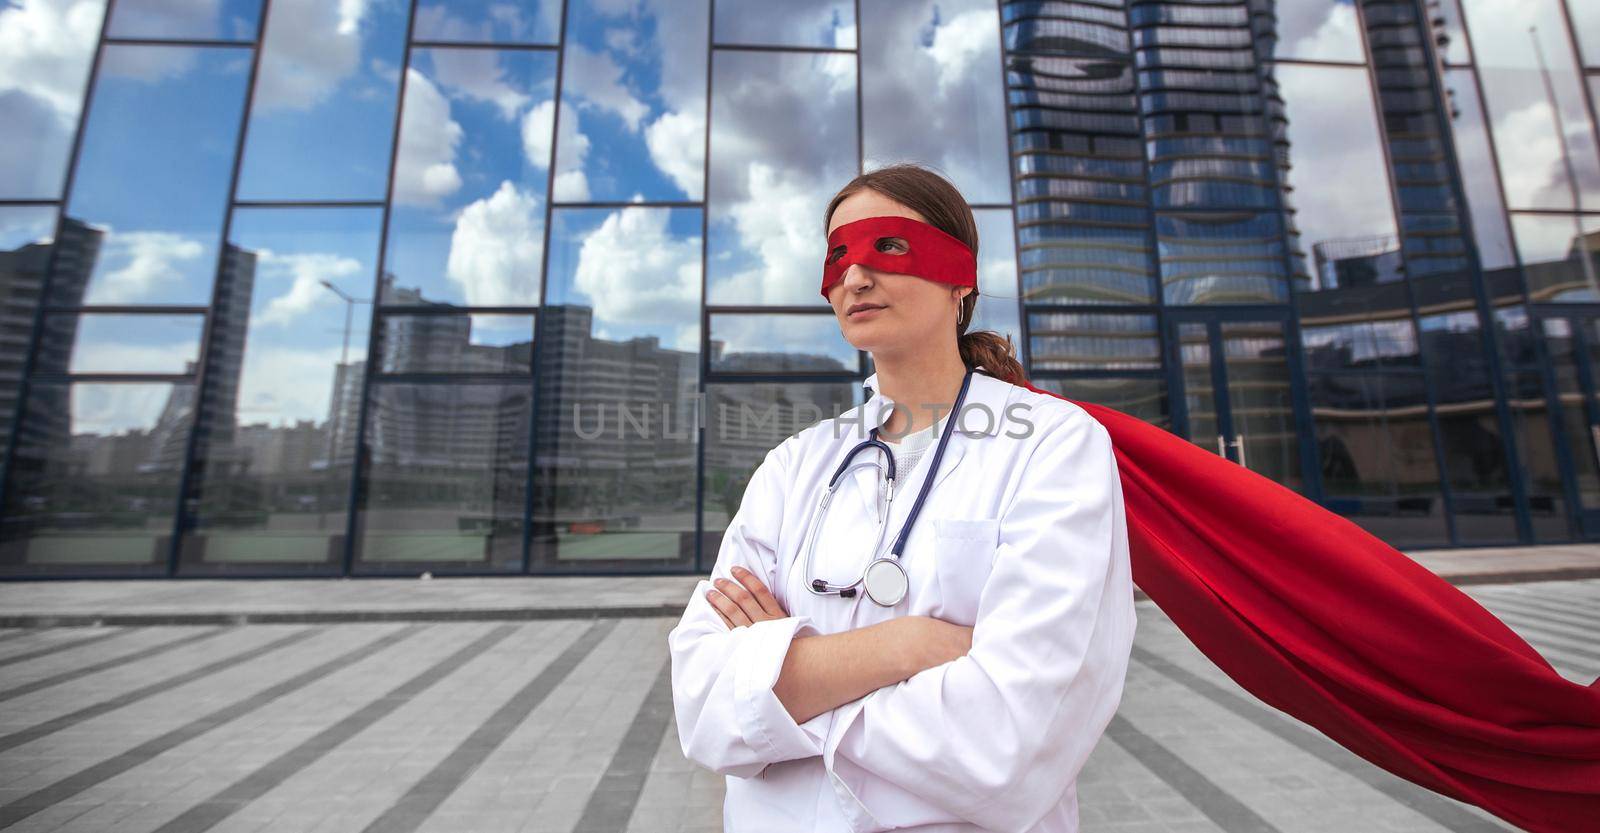 female paramedic in a superhero raincoat standing on a city street. photo with a copy-space.